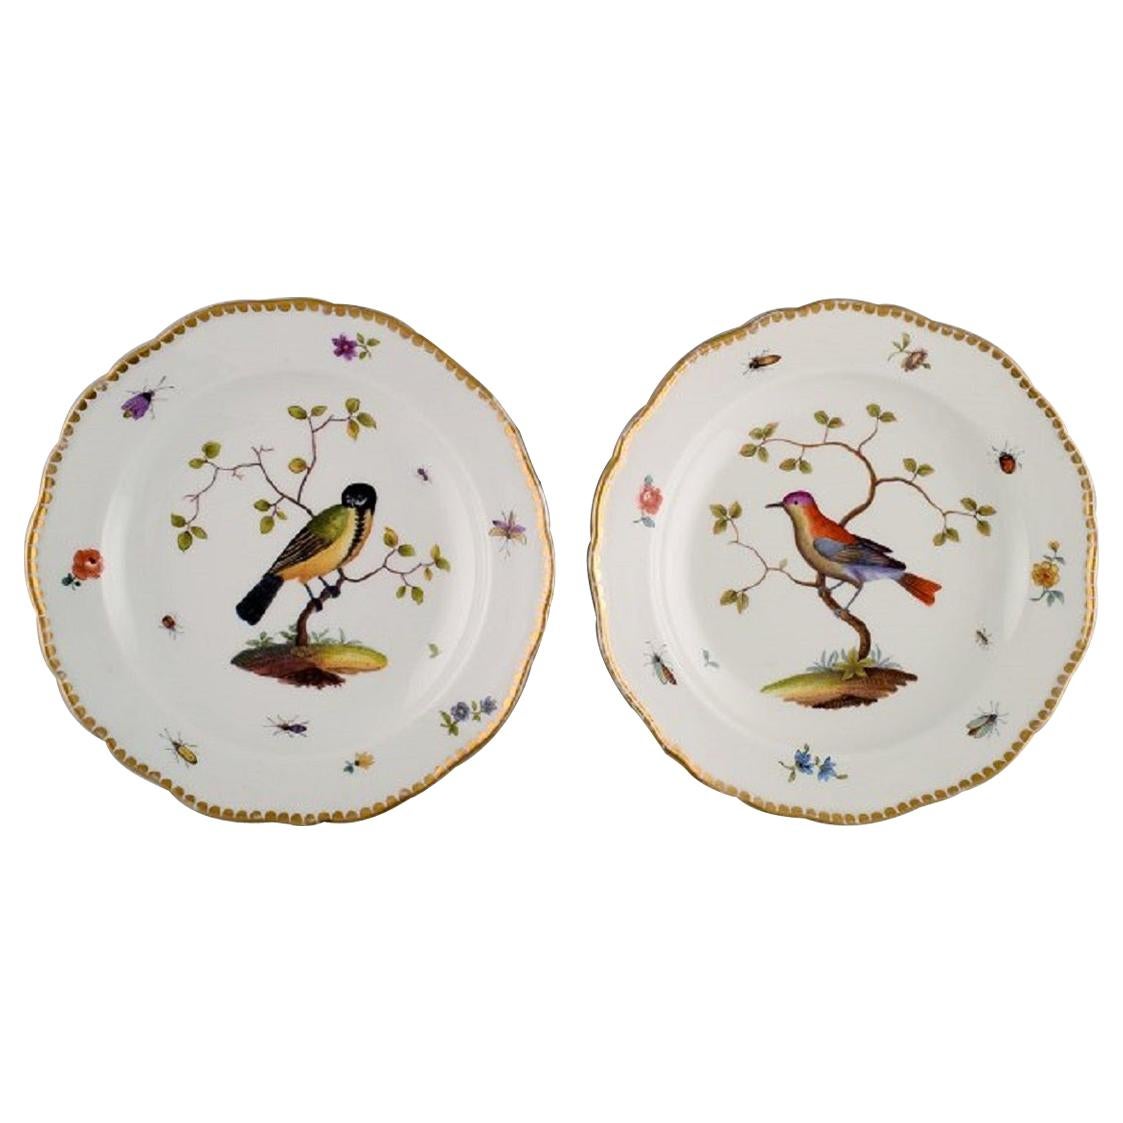 Two Antique Meissen Plates in Hand Painted Porcelain with Birds, 19th Century